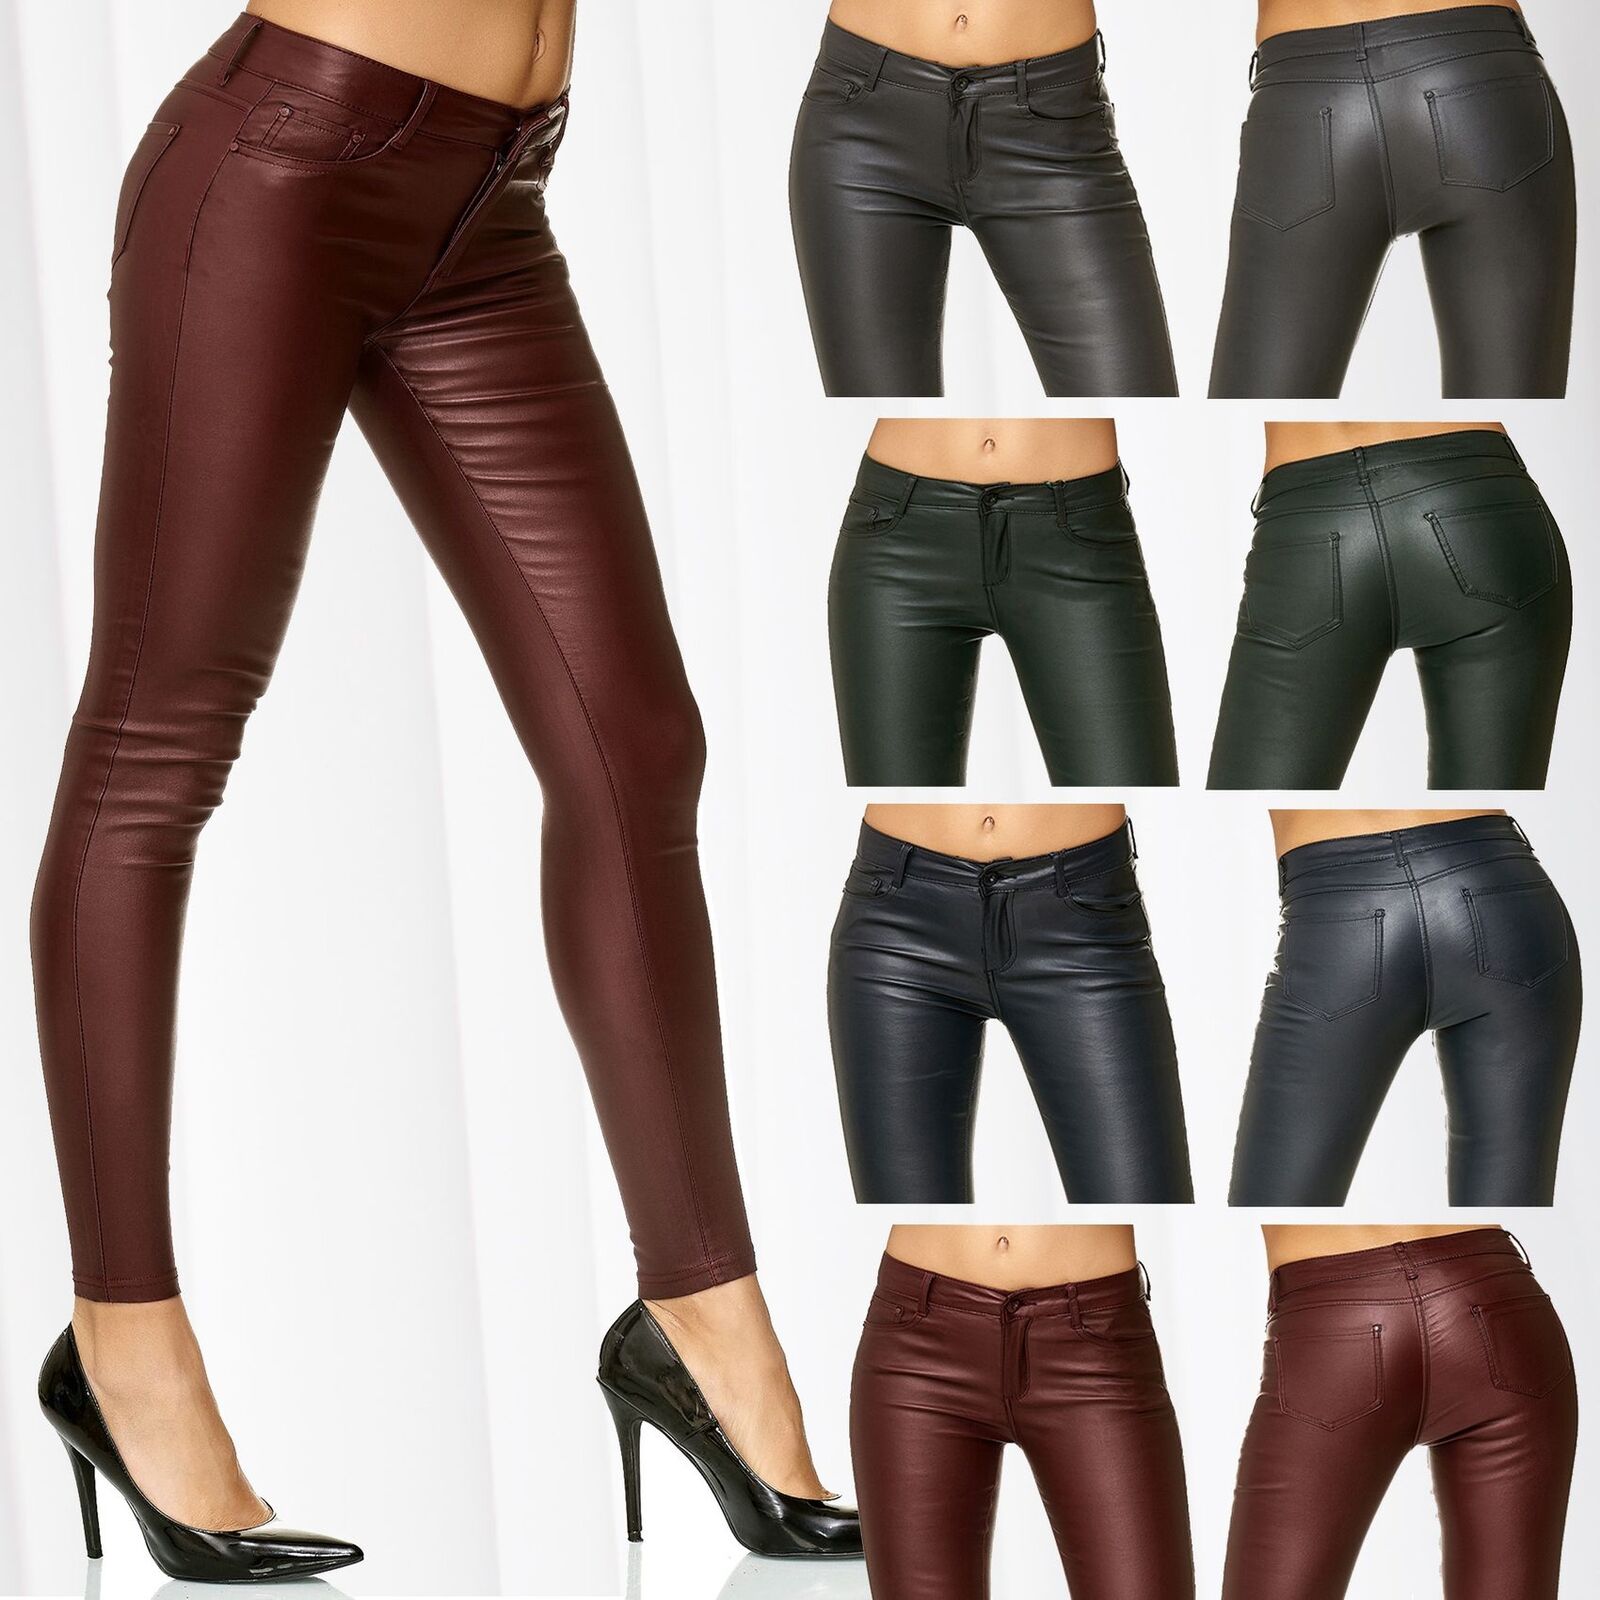 ZOGAA Women's PU Leather Pants Skinny Sexy Trousers 2019 Autumn Fashions Solid Pencil Pants Lady Pants Biker Art Leather Trouser